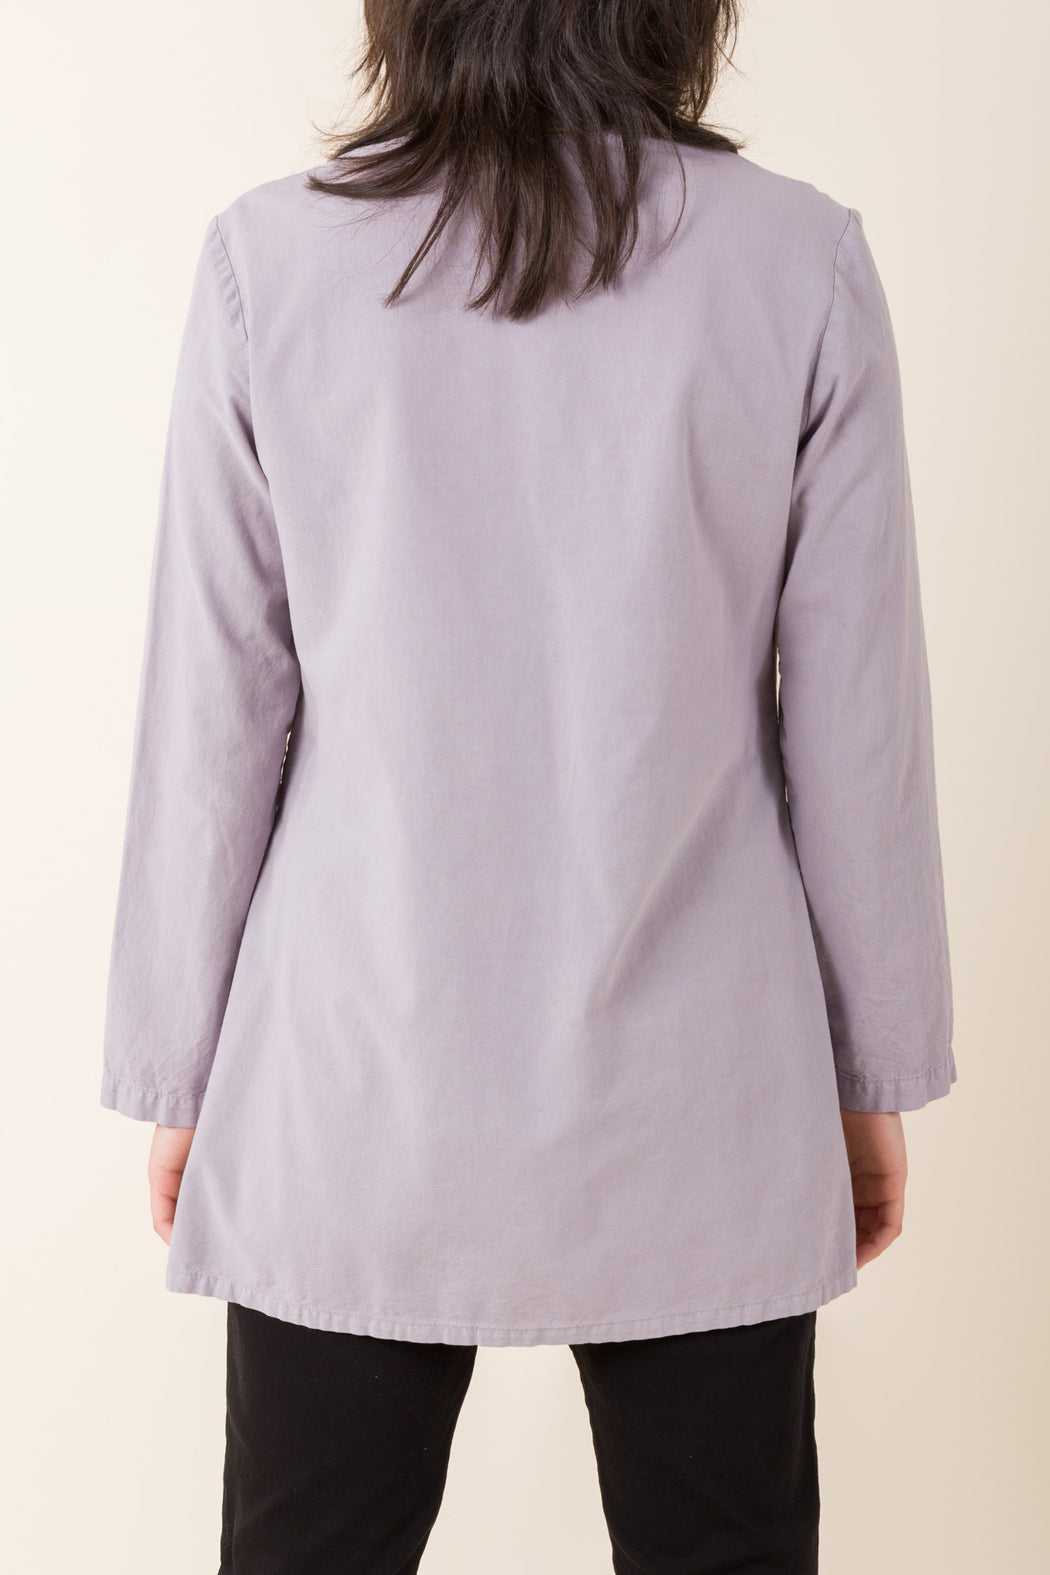 For several years we have refined our take on the ethereal, poet’s blouse. The Pallas Shirt has been designed to function nobly while being easy to care for and incredibly soft to wear. A unique woven shirt for shifting social spaces. 